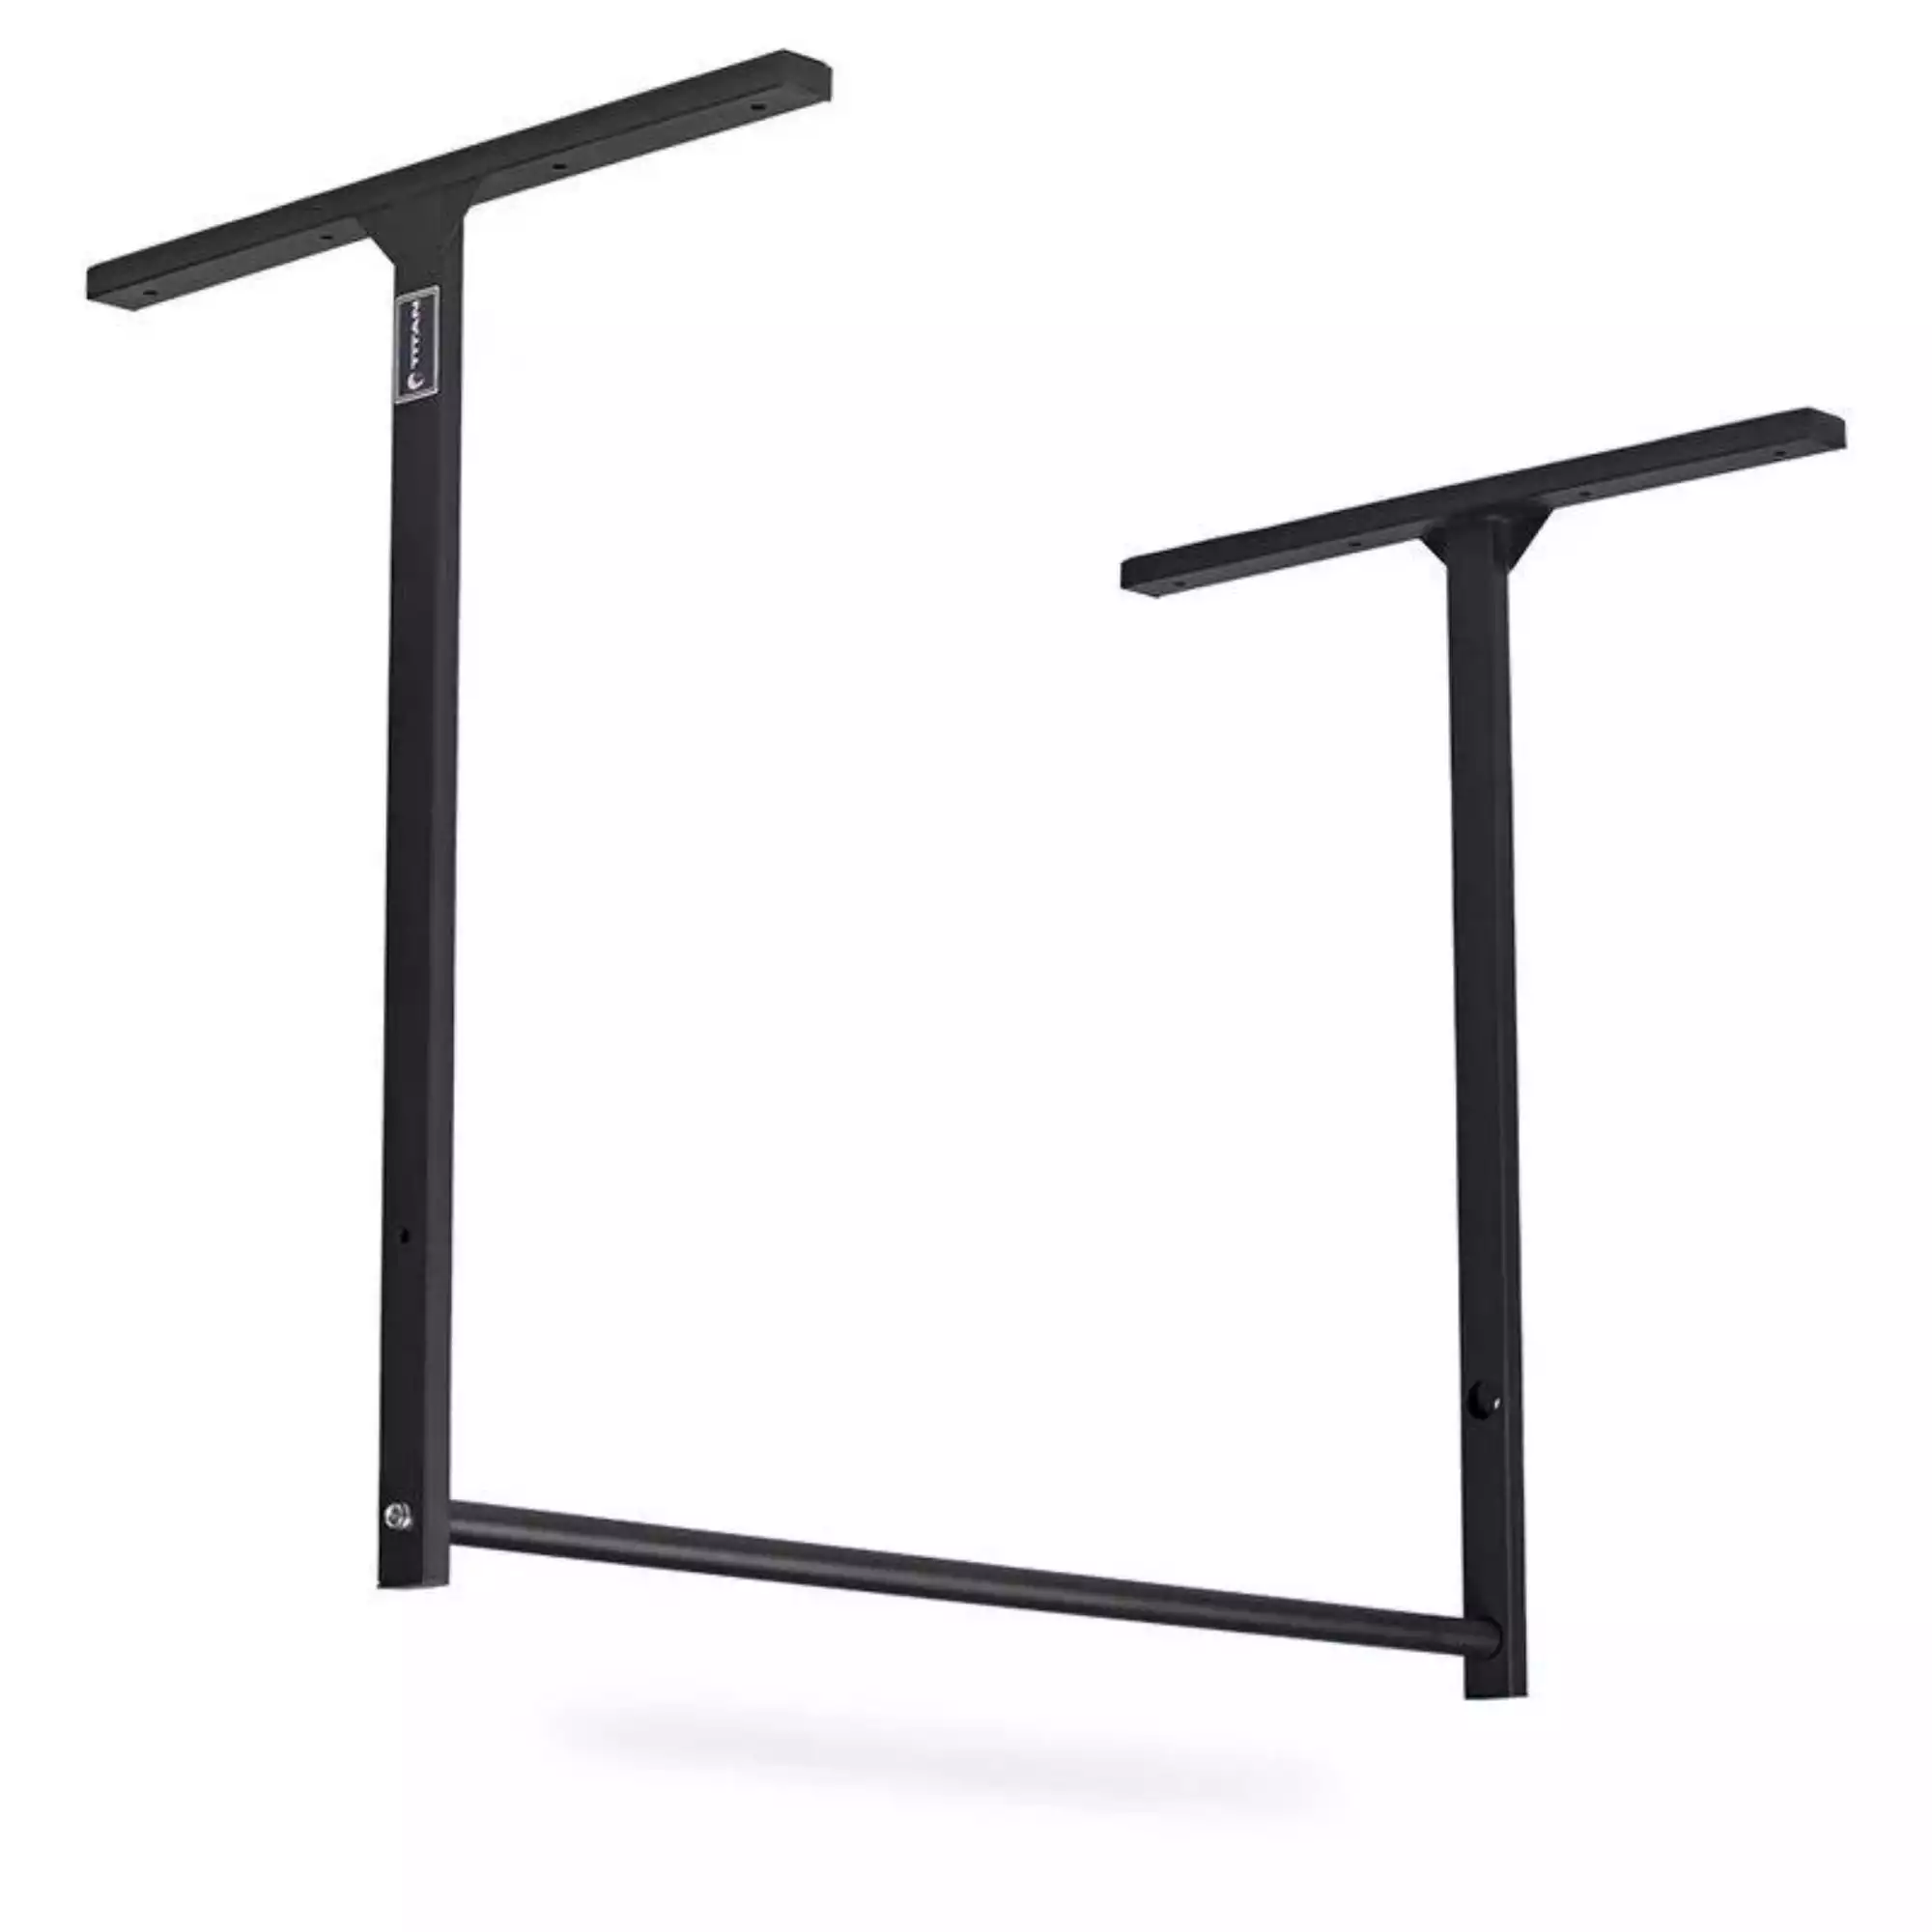 Titan Fitness Large Adjustable Ceiling Wall-Mount Pull-Up Bar